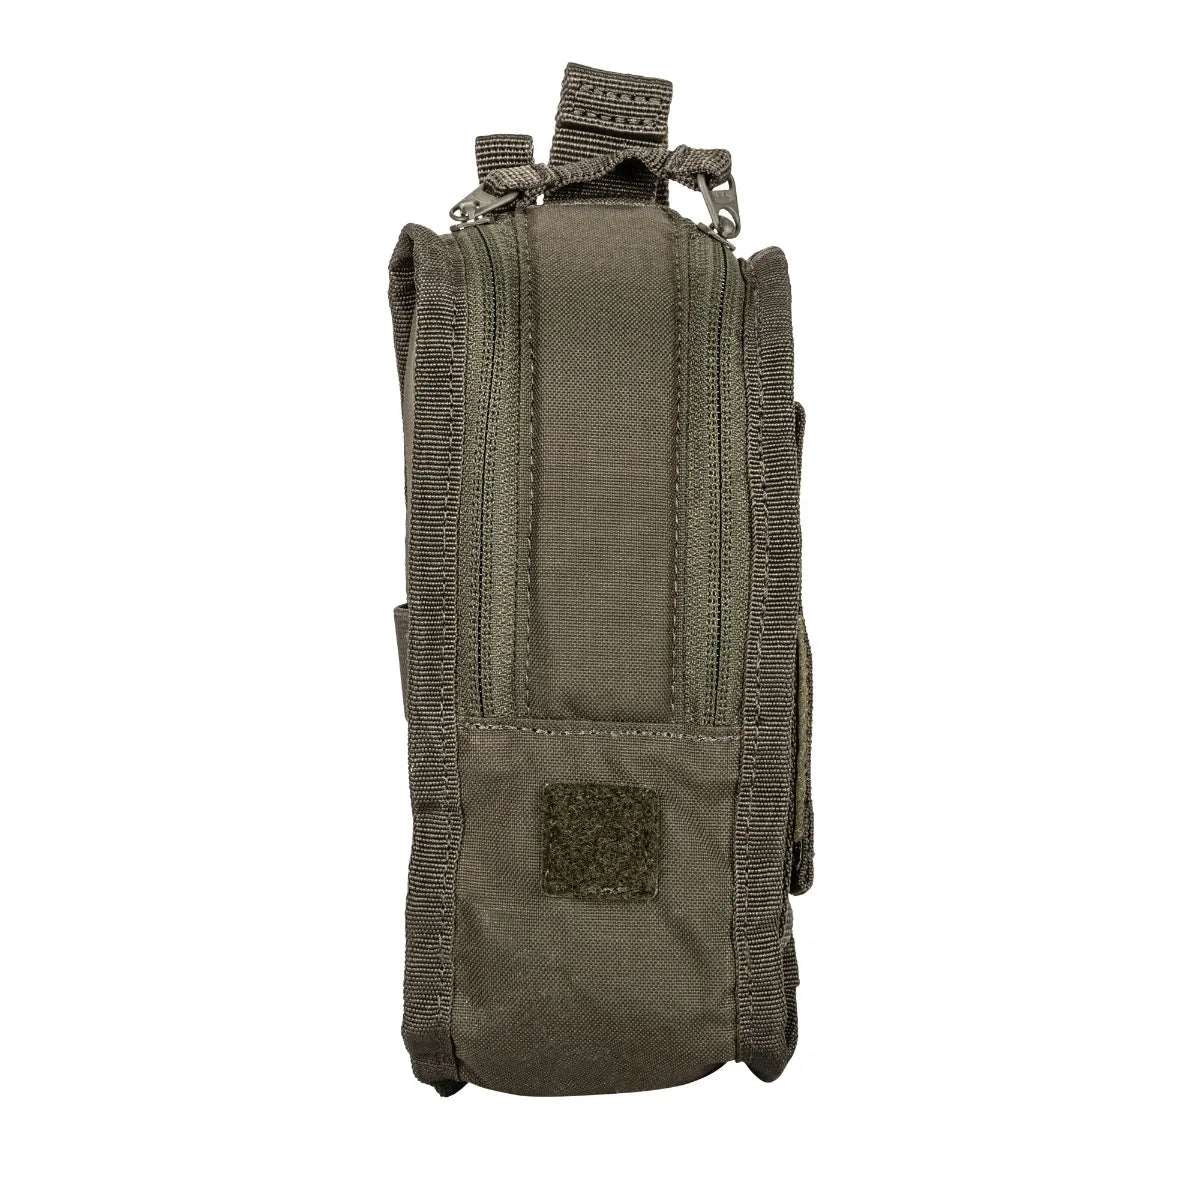 Medical Pouches - 5.11 Tactical Flex Med Pouch